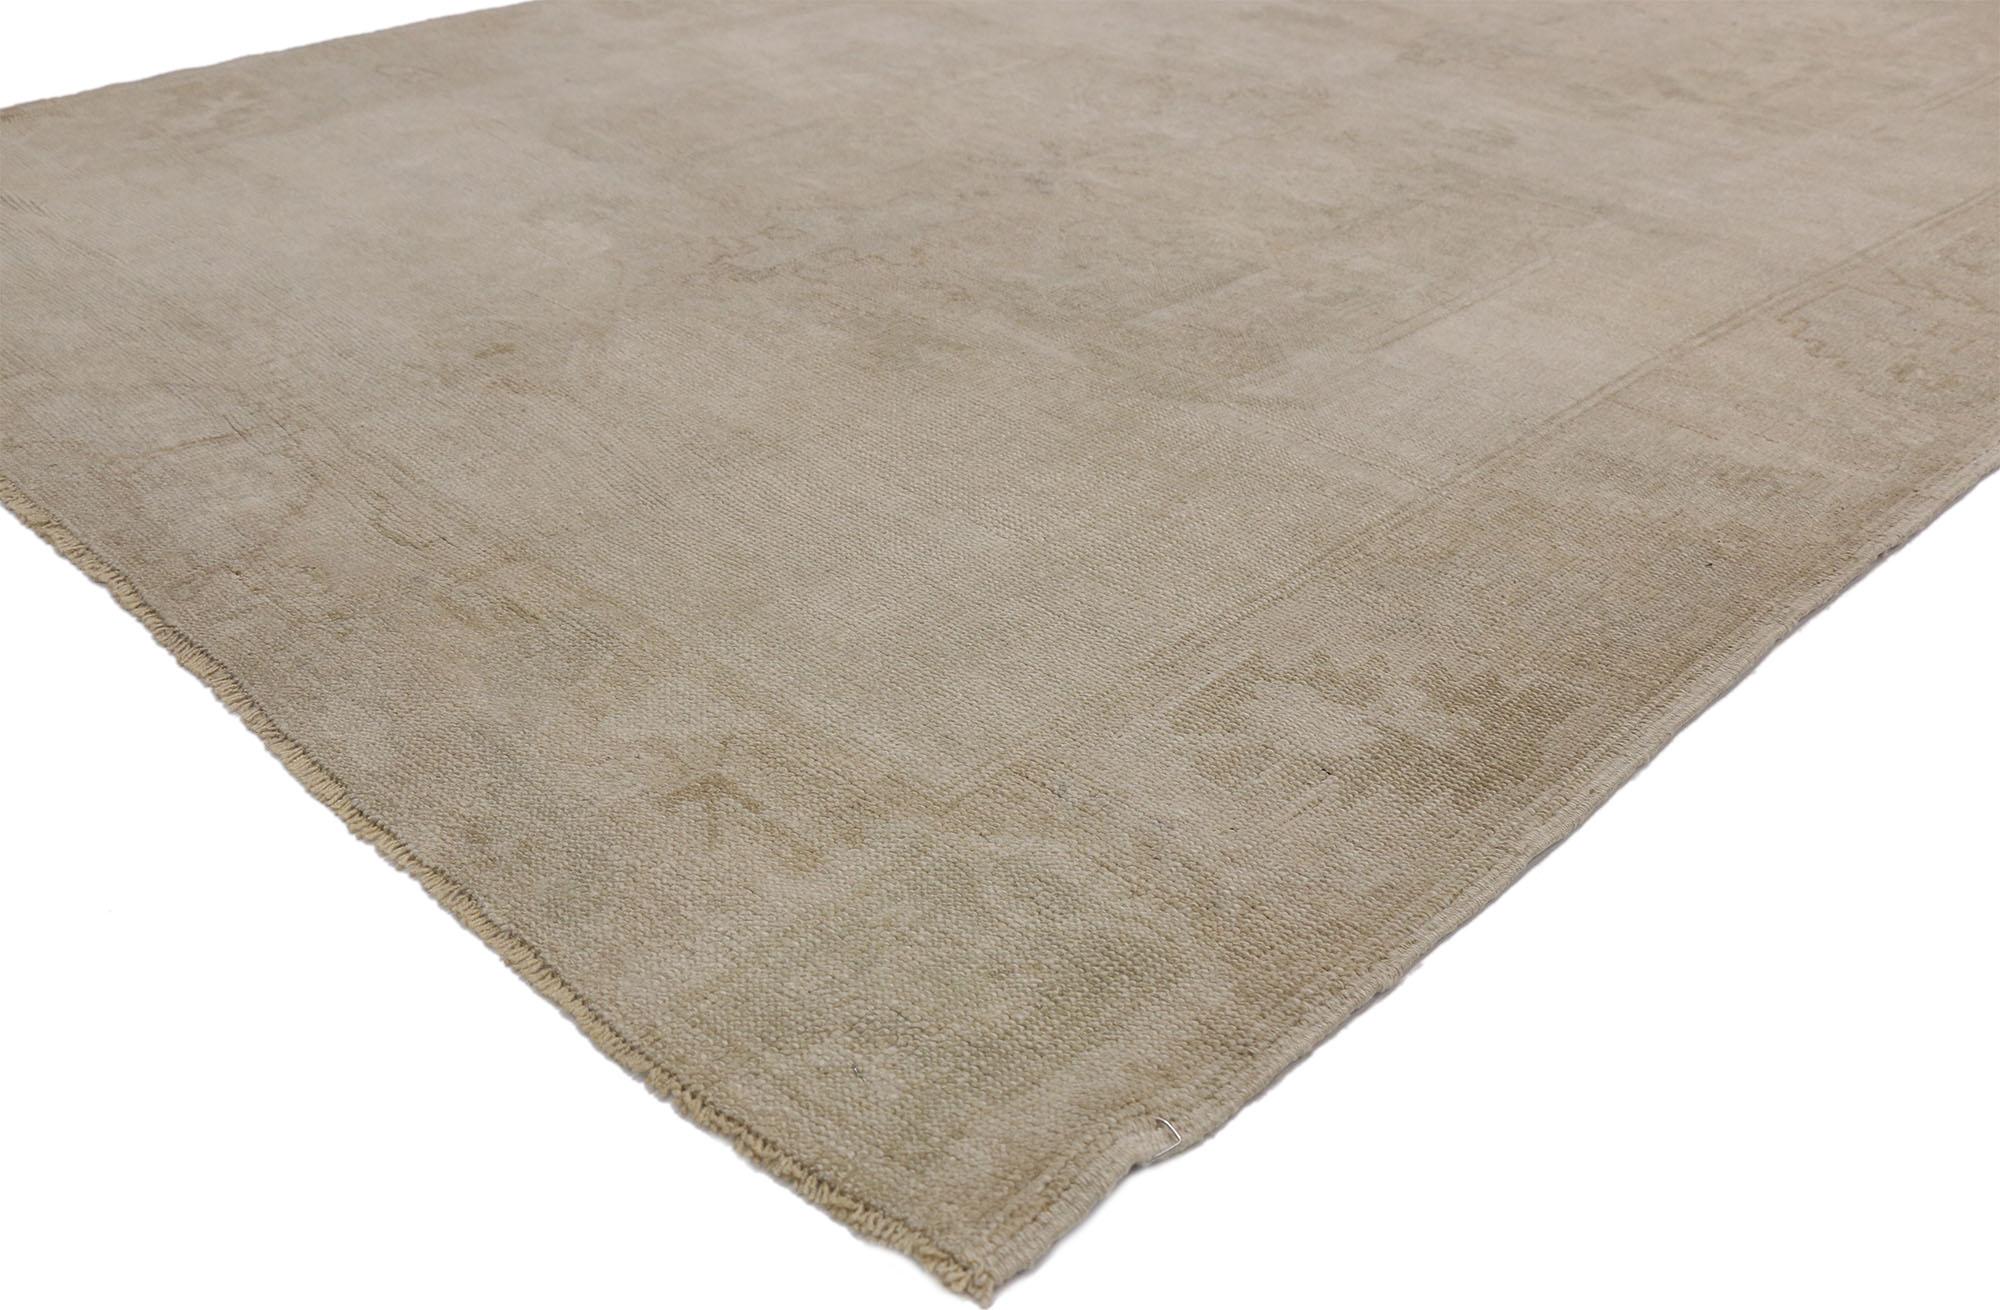 52478 Vintage Turkish Oushak Gallery rug with Rustic style and neutral colors. This hand knotted wool vintage Turkish Oushak rug features three ethereal medallions in an open abrashed field. It is enclosed with a subtle Meander floral border. Warm